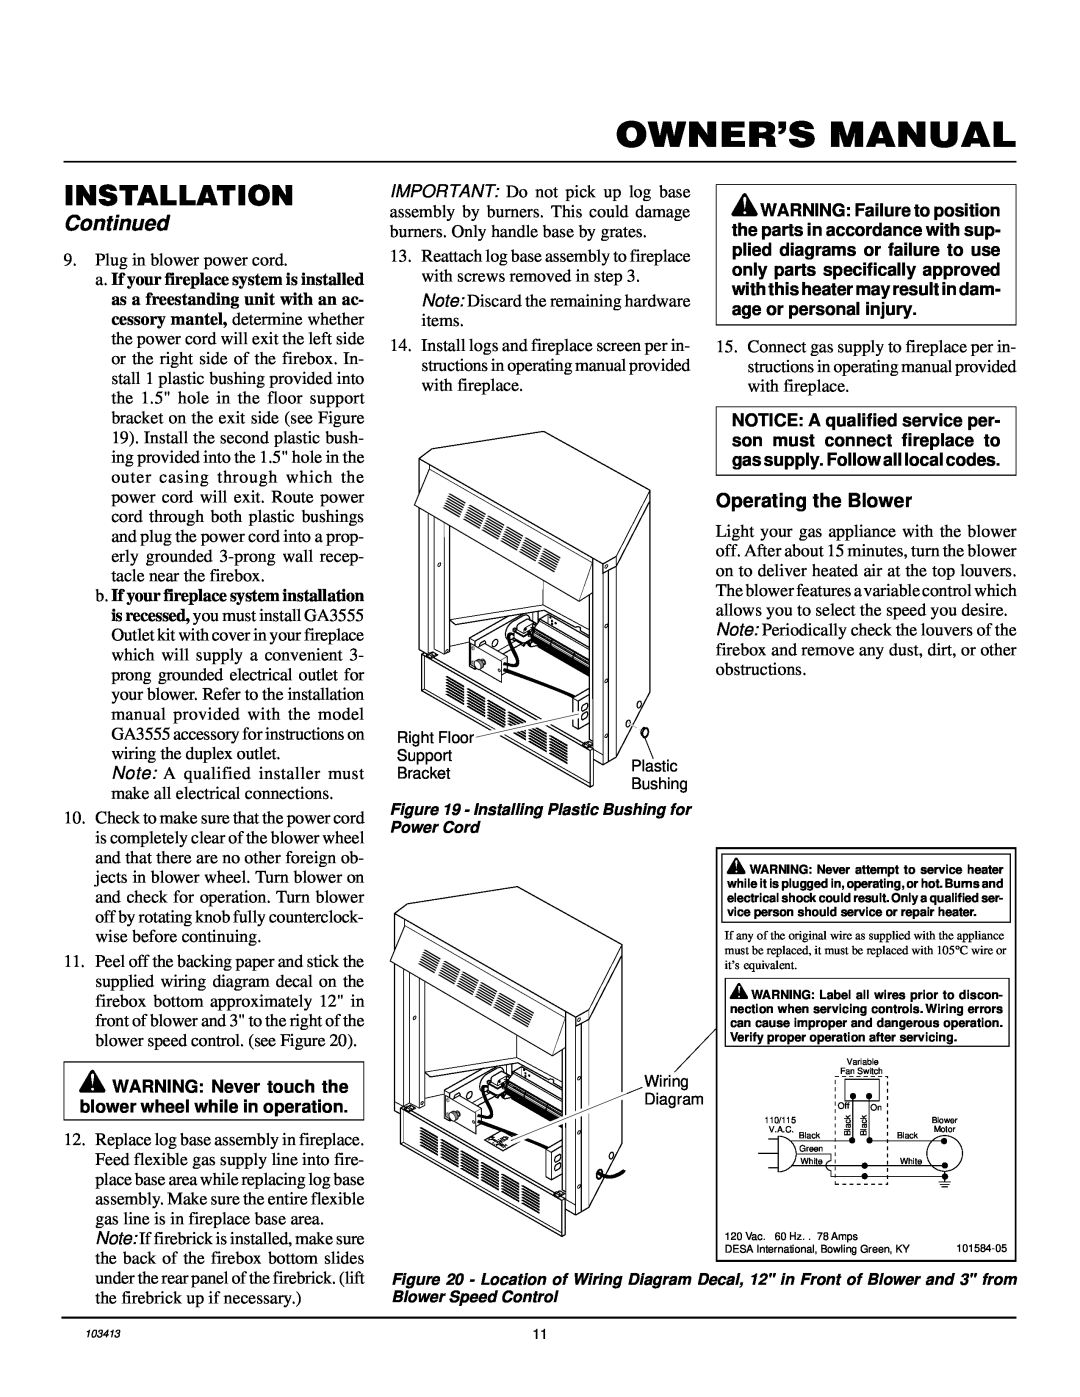 Desa CGFP28NT installation manual Operating the Blower, Installation, Continued, a. If your fireplace system is installed 